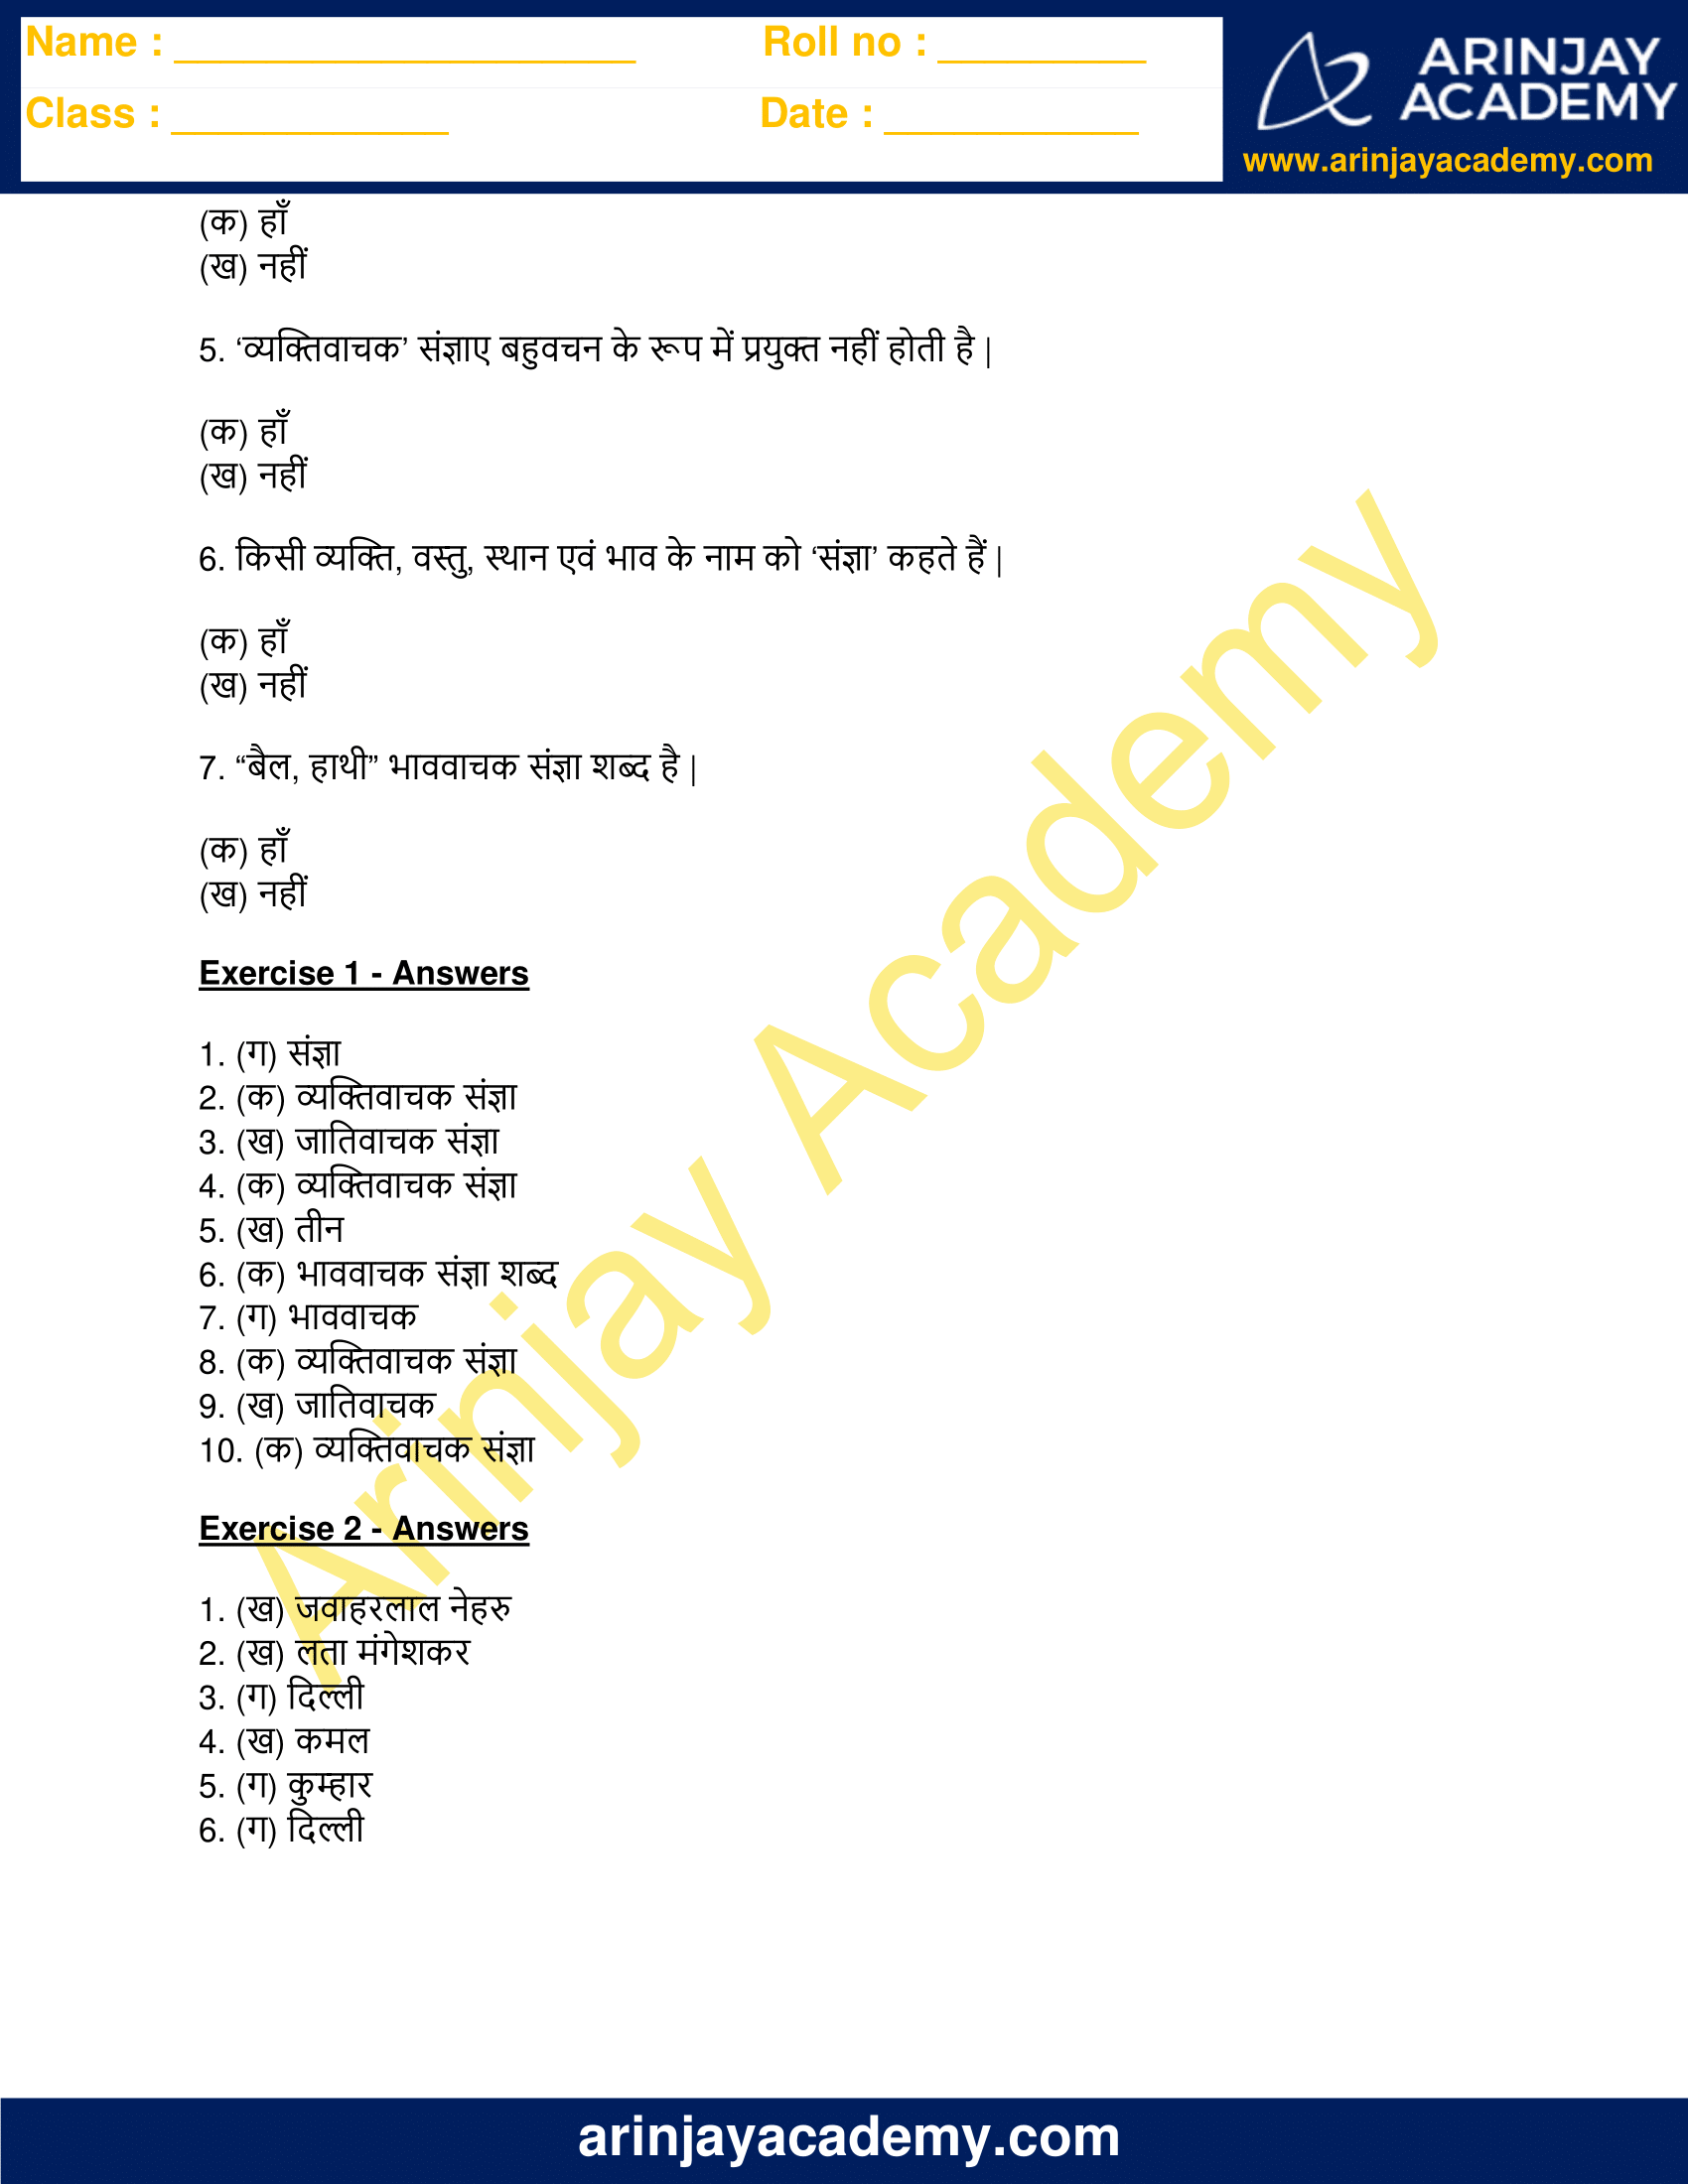 sangya worksheet for class 3 free and printable arinjay academy